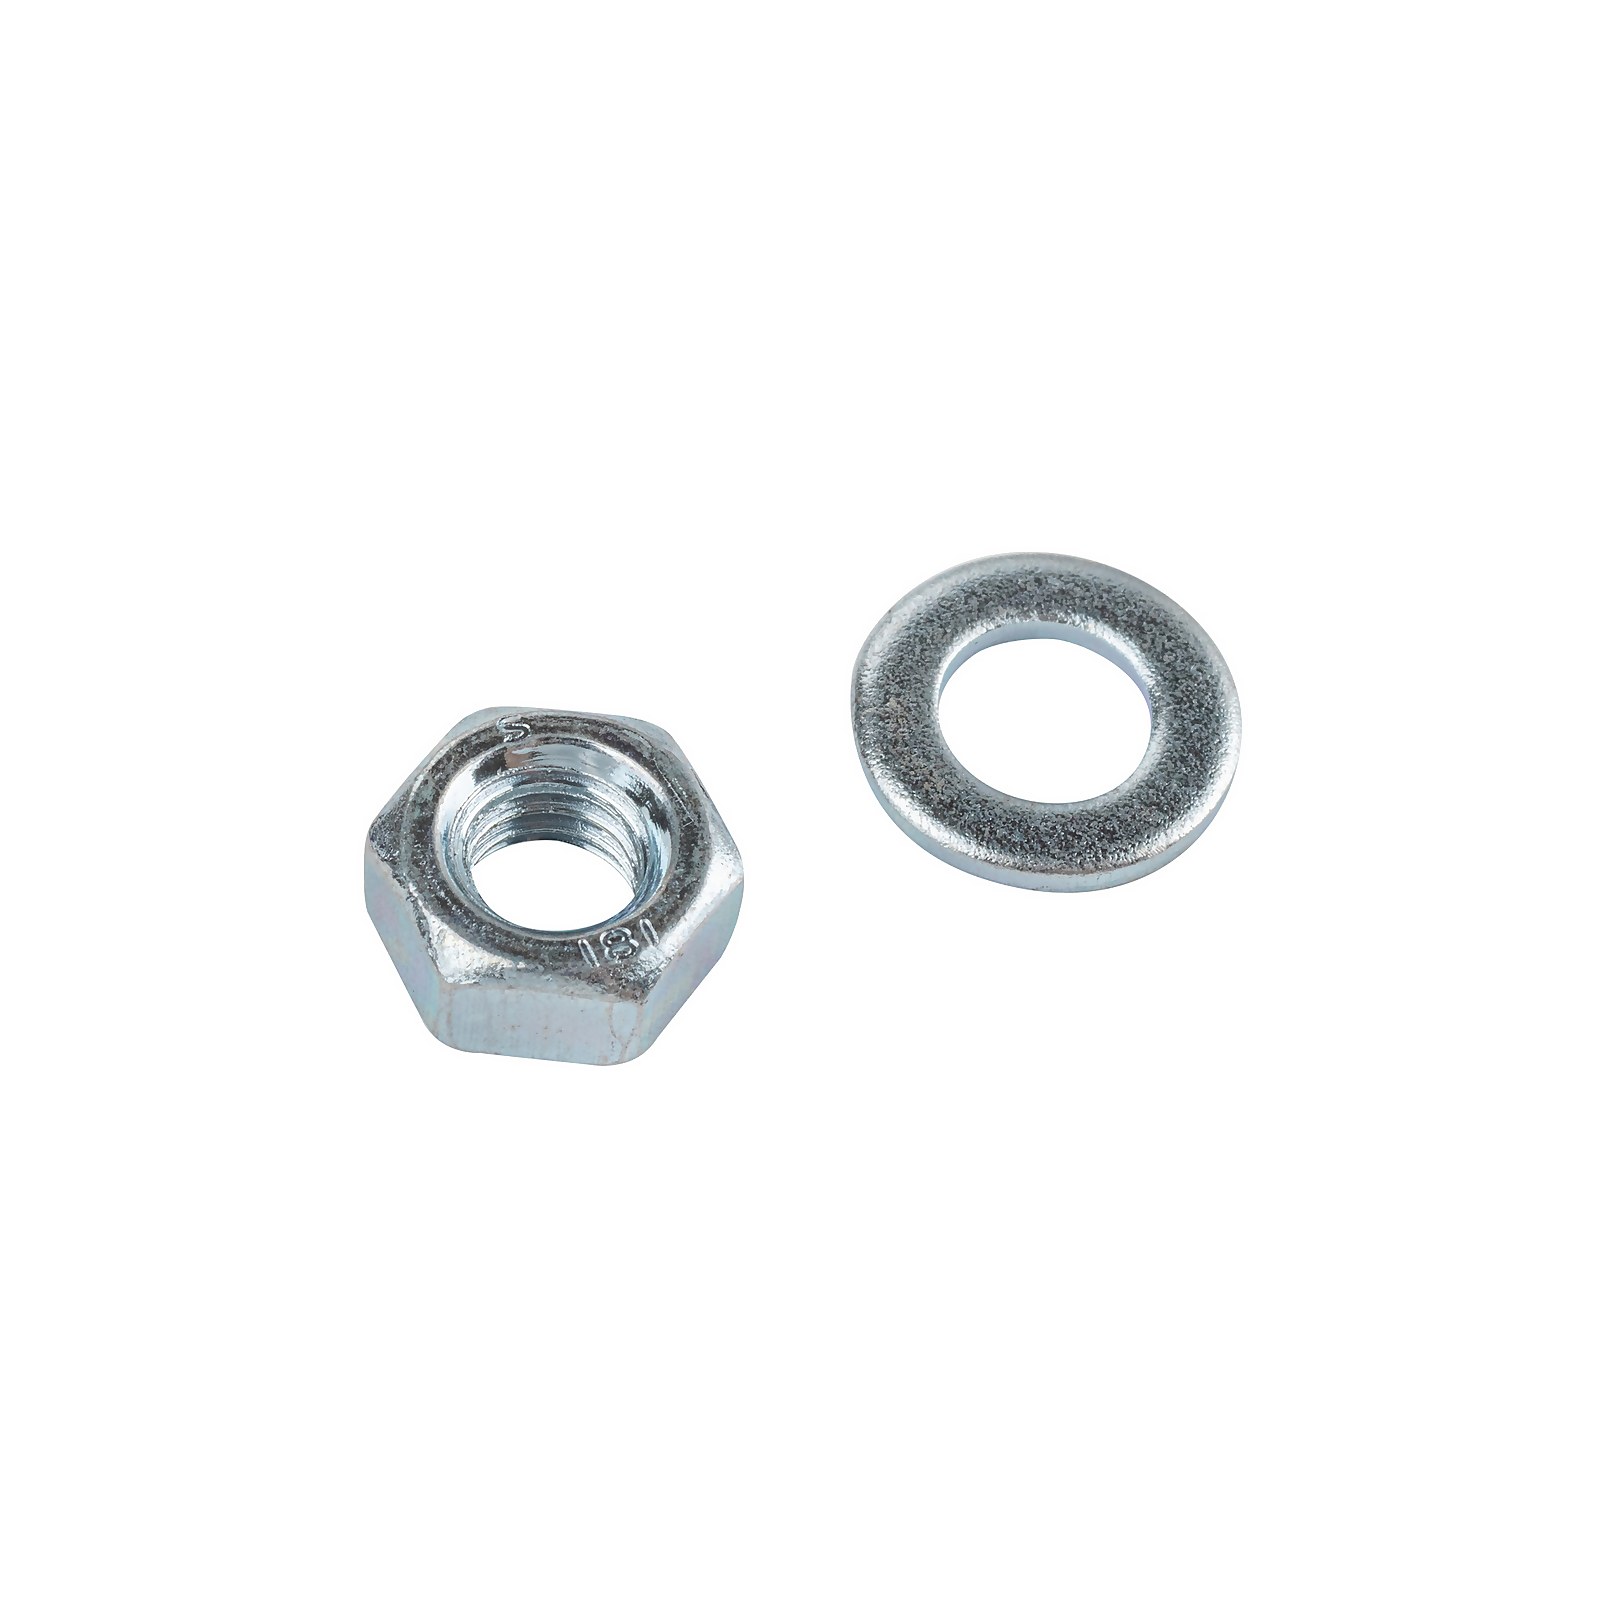 Photo of Homebase Zinc Plated Hex Nut & Washer M6 10 Pack